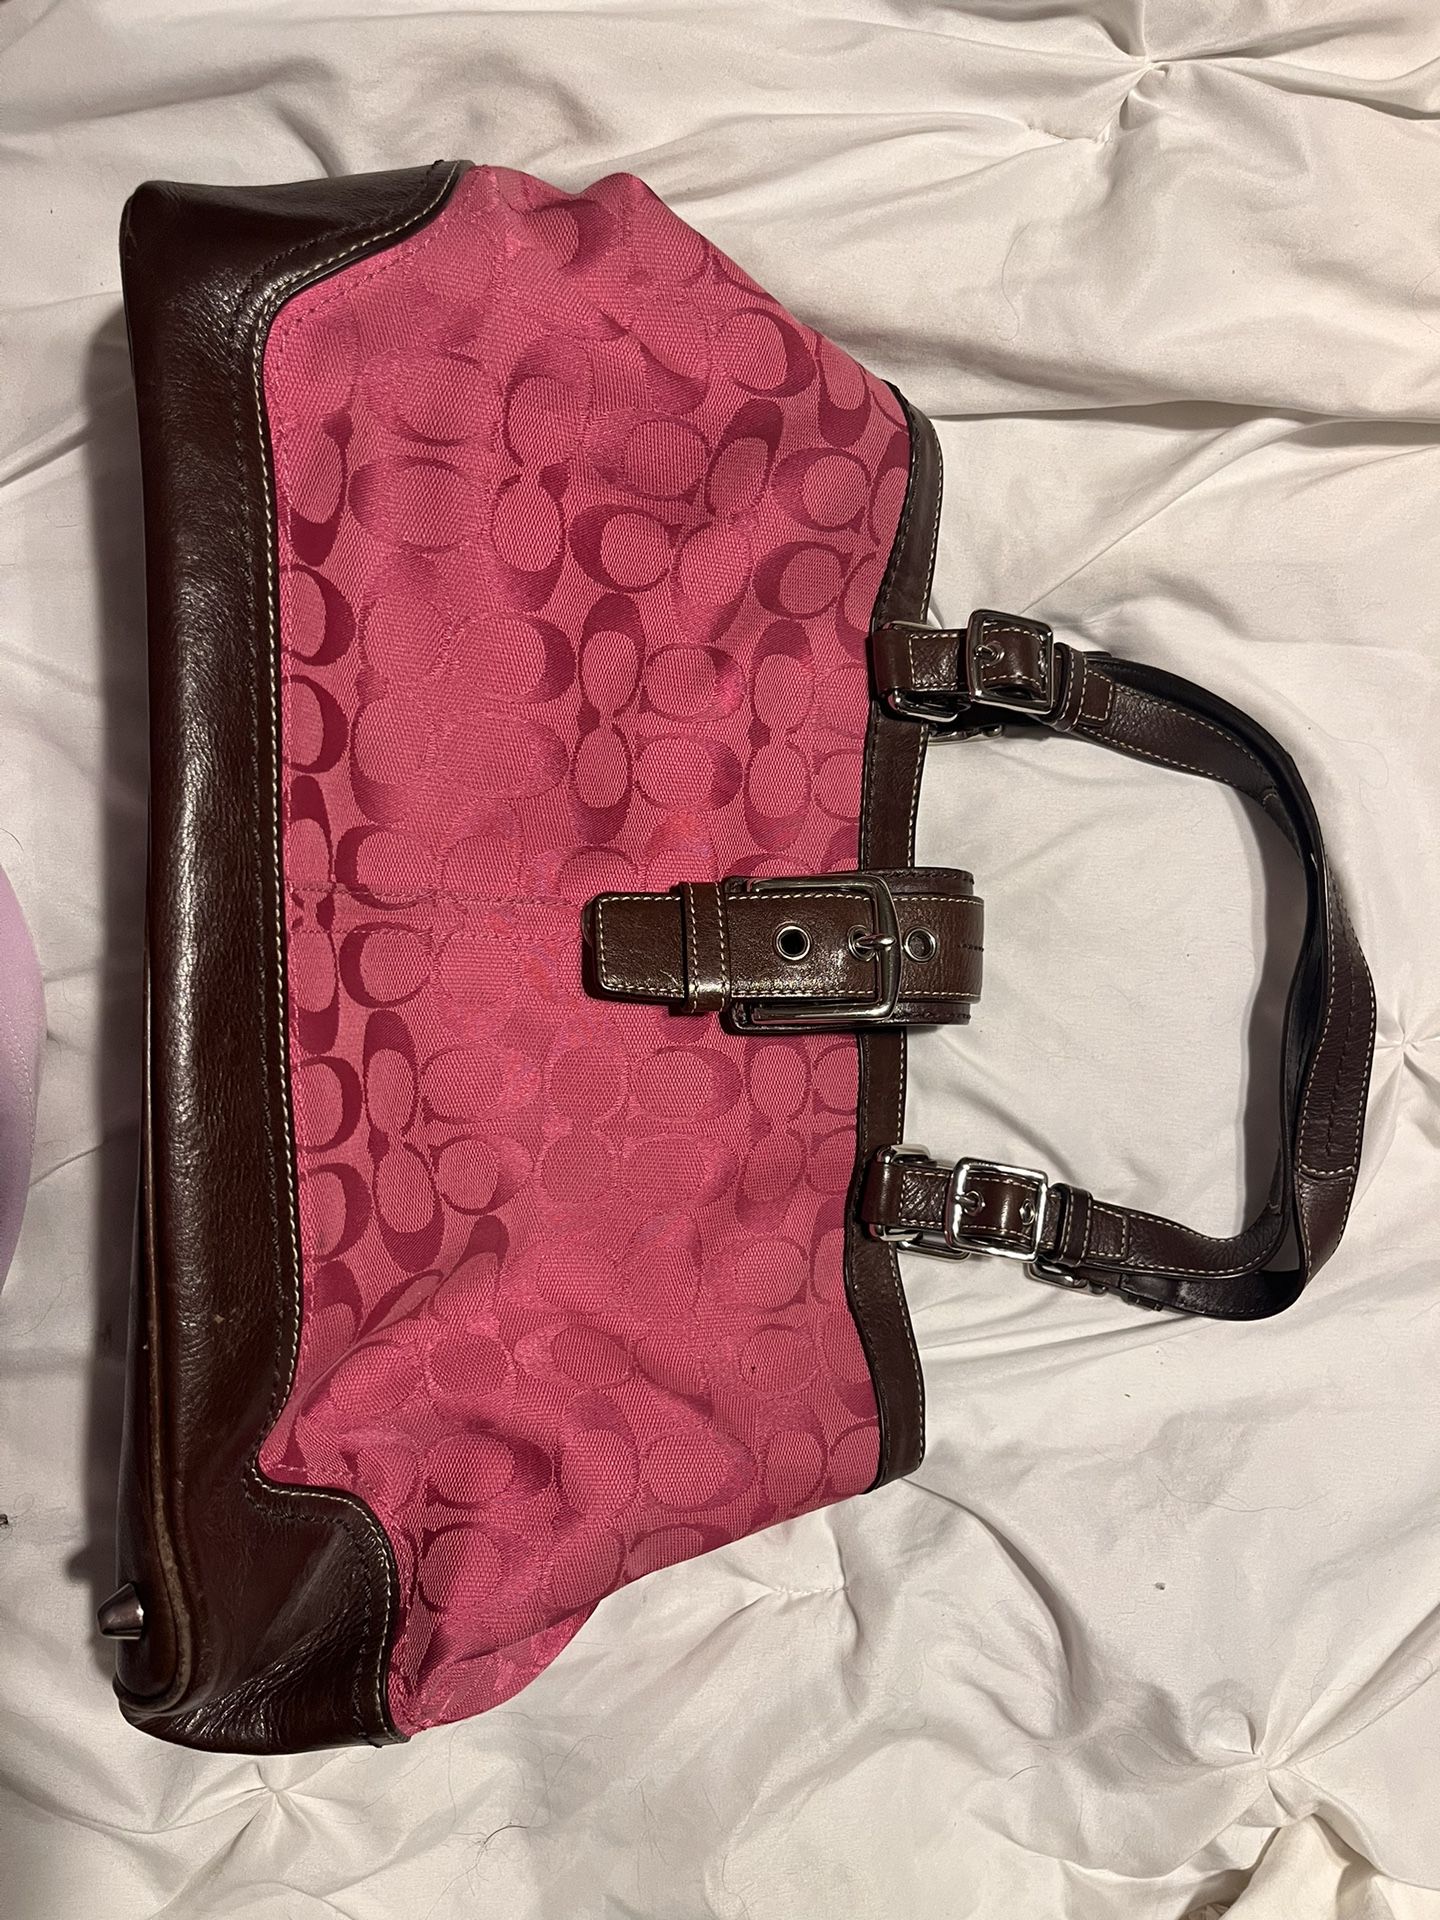 Gently Used Coach Purses